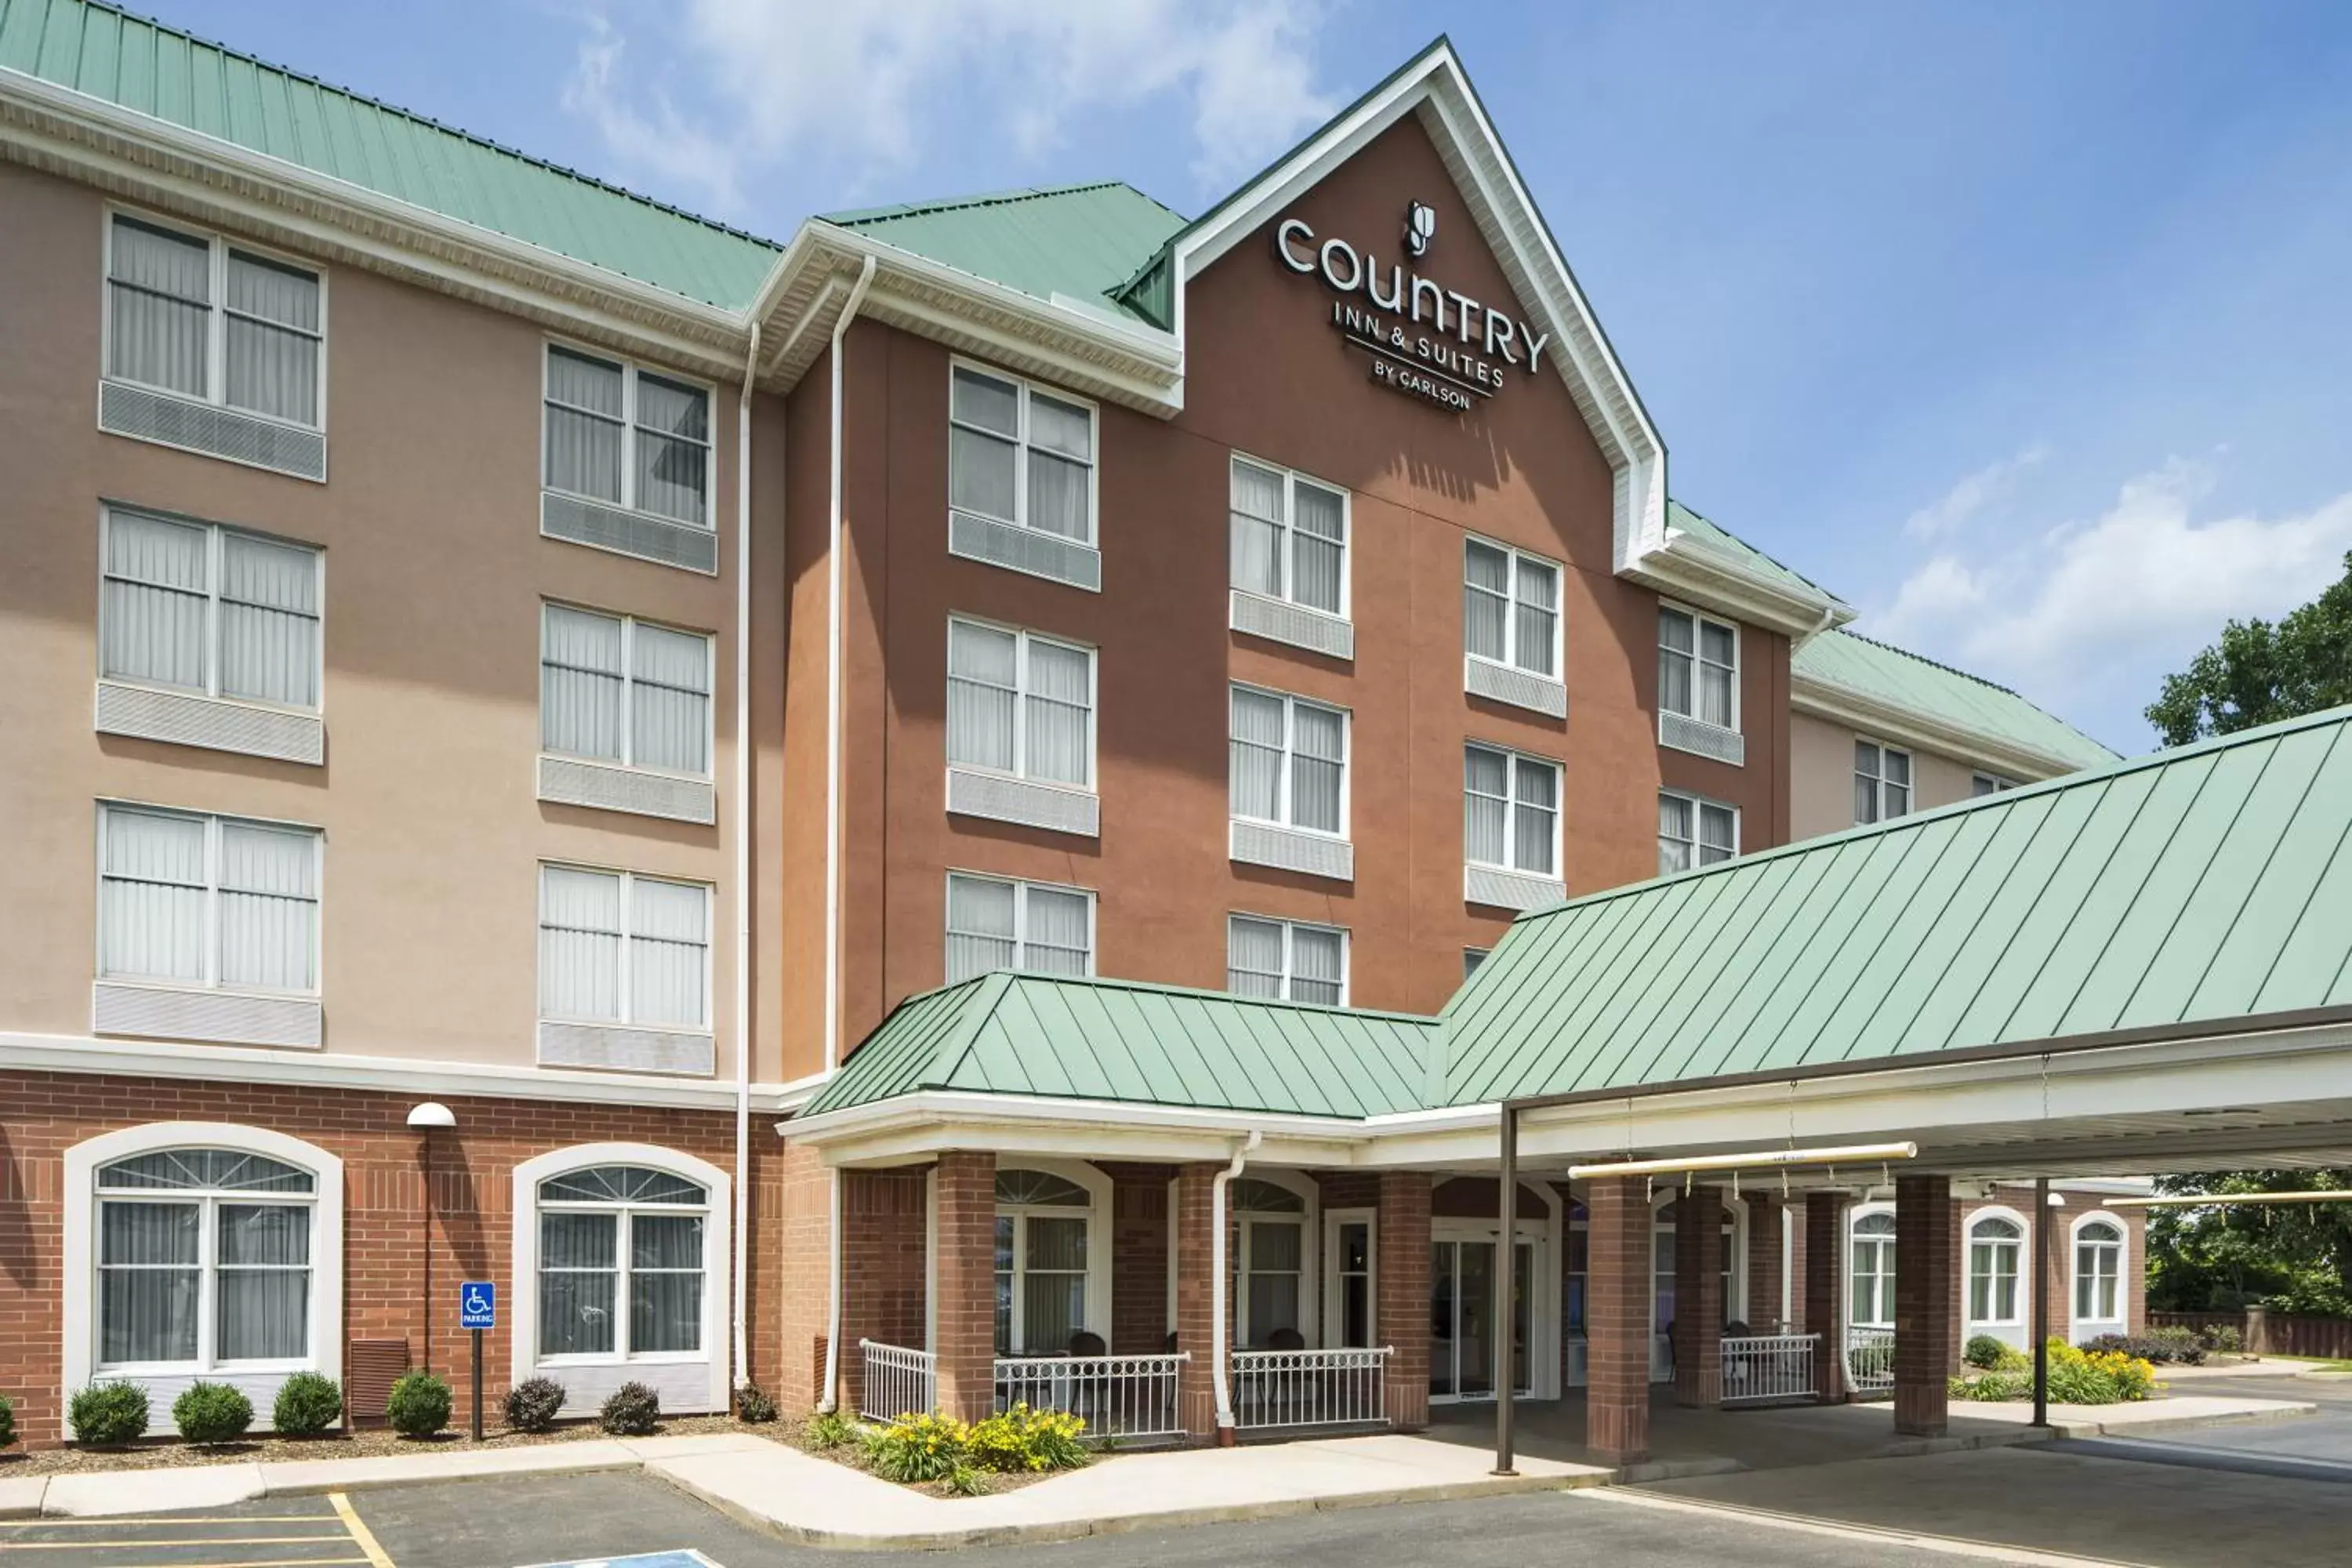 Facade/entrance, Property Building in Country Inn & Suites by Radisson, Cuyahoga Falls, OH